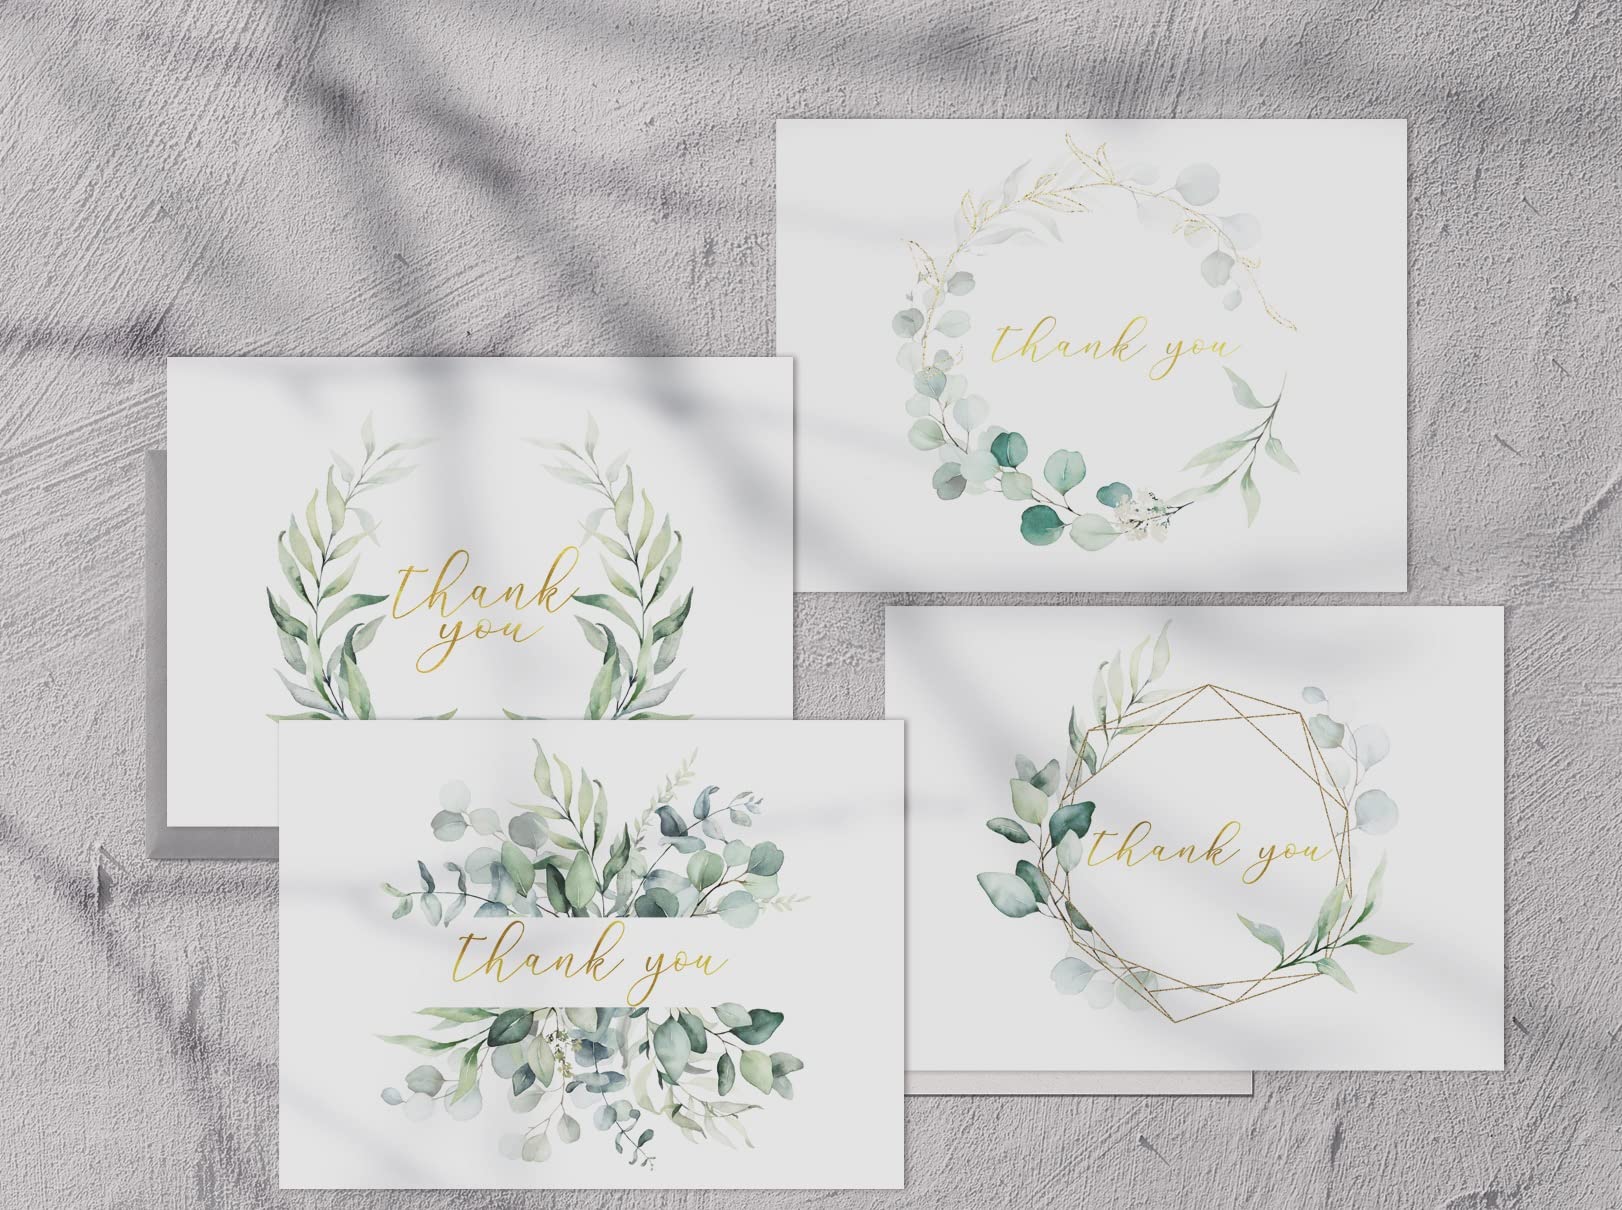 AMNADOF 100 Eucalyptus Gold Foil Thank You Cards Bulk - Blank Note Cards with Greenery Envelopes – Include Stickers, Perfect for Wedding,Baby Shower, Bridal Shower and All Occasions